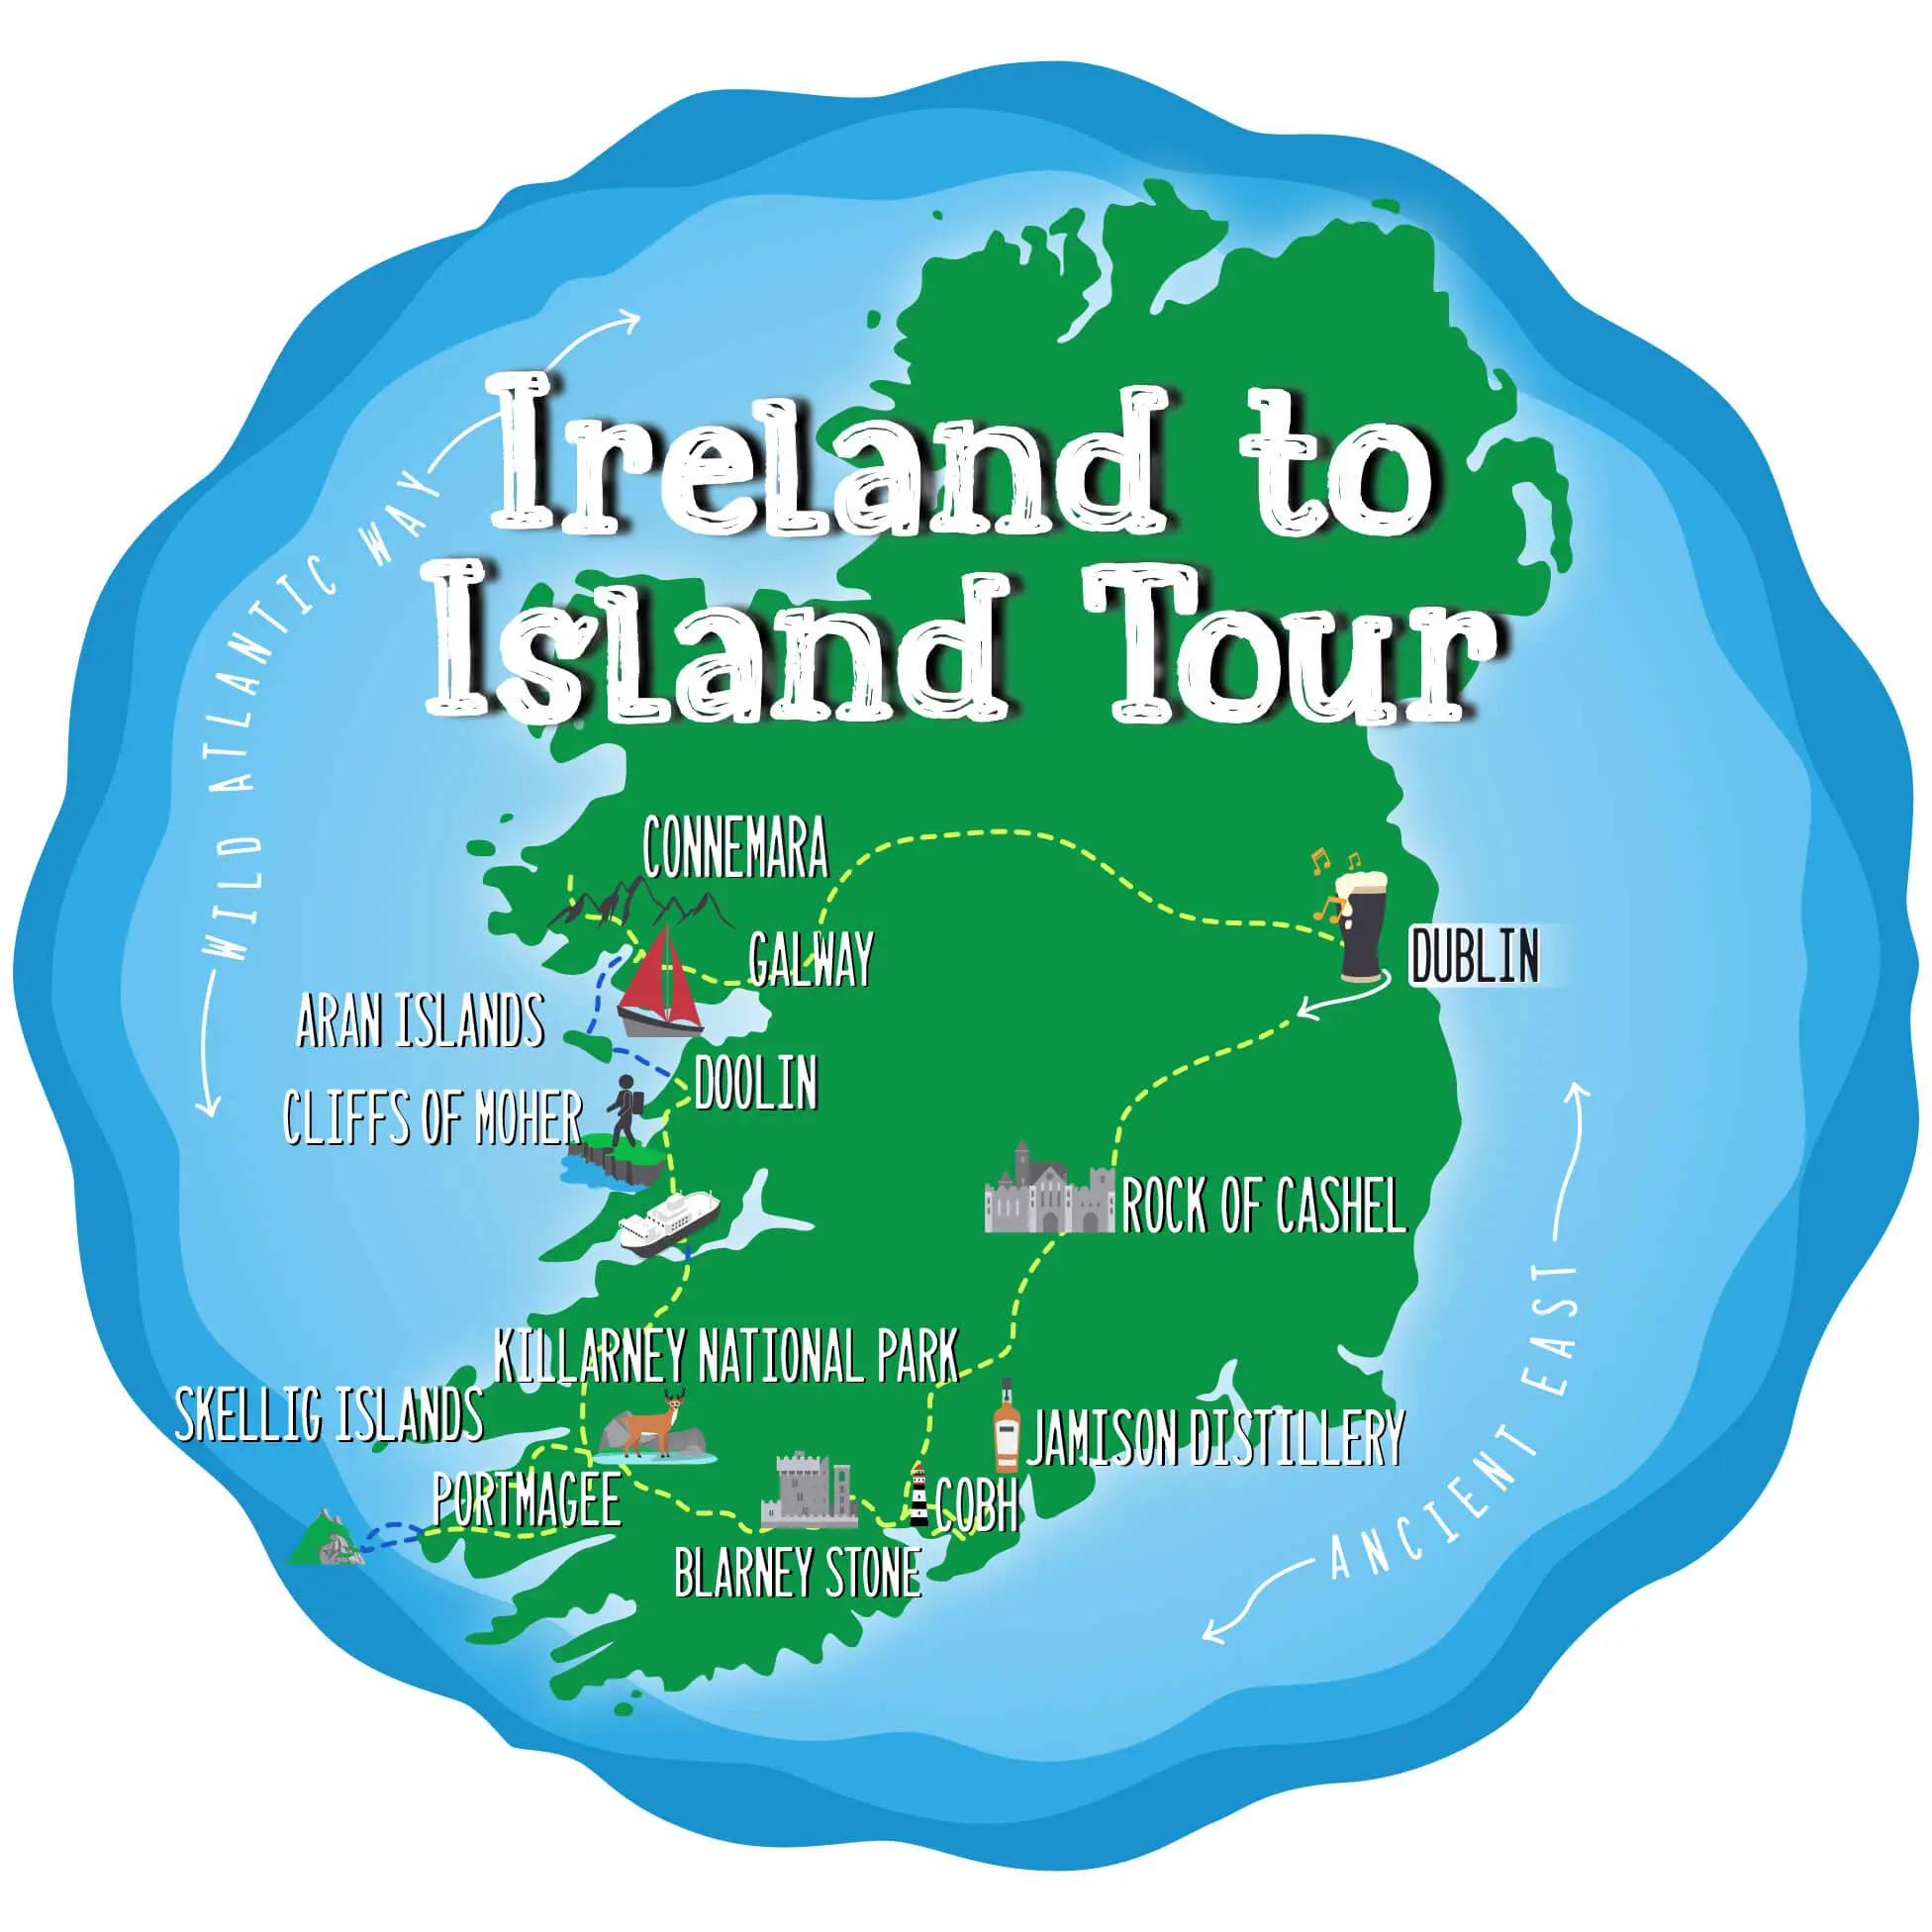 Tourist map highlighting destinations in an Ireland tour designed for small group tours.